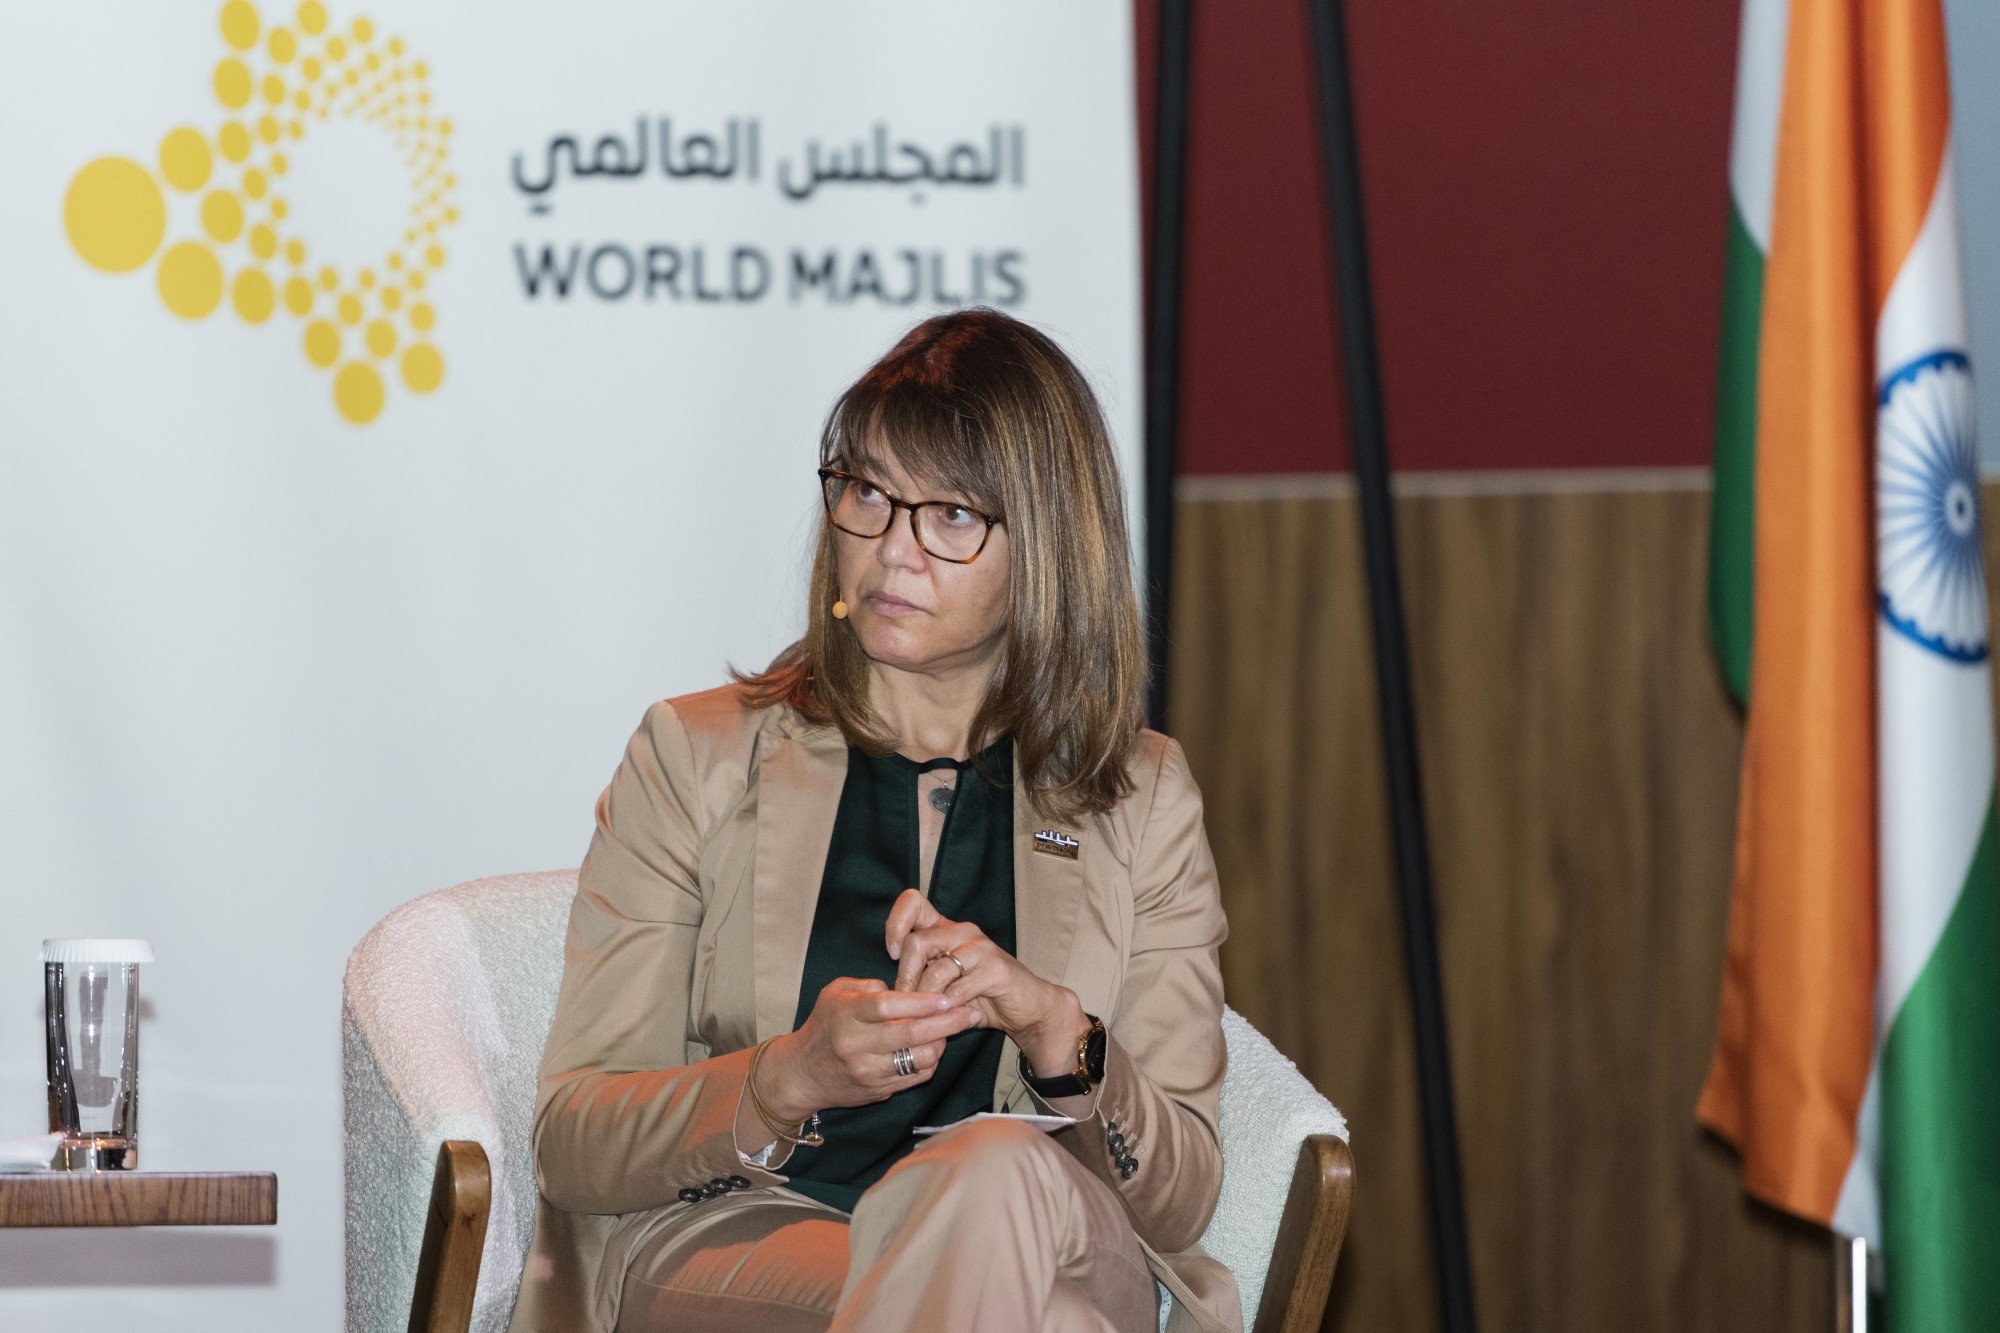 Ana Paula Pais, Head of Education at Turismo de Portugal, Ministry of Economics, Portugal during World Majlis - Off the Beaten Path Travel in the 21st Century at the India Pavilion m32432